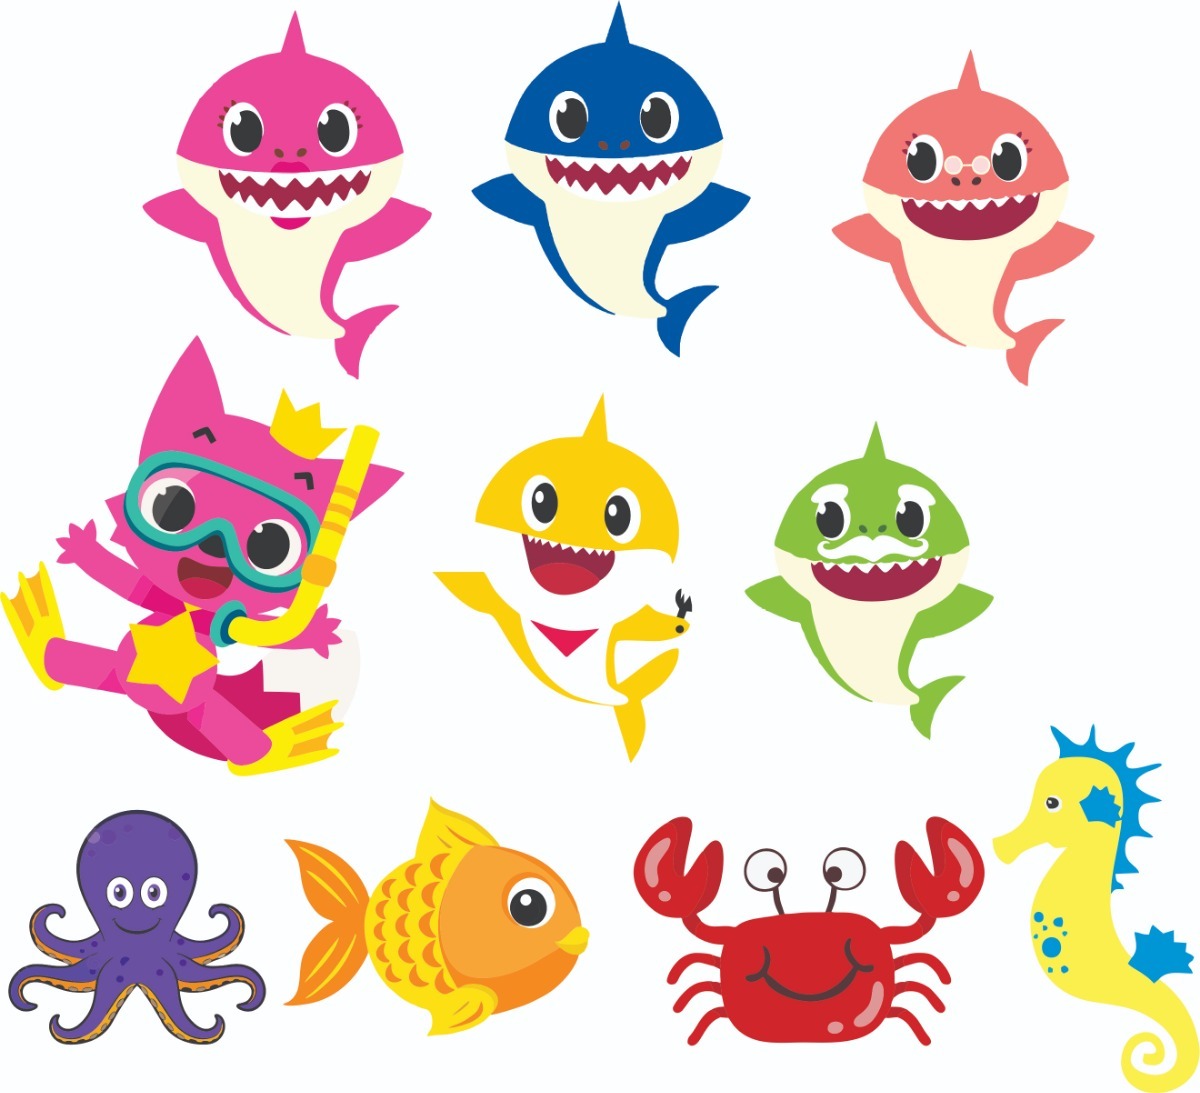 Baby Shark Fun Video Fish, Seahorse, Pinkfong Pictures PNG Transparent  Background, Free Download #49179 - FreeIconsPNG